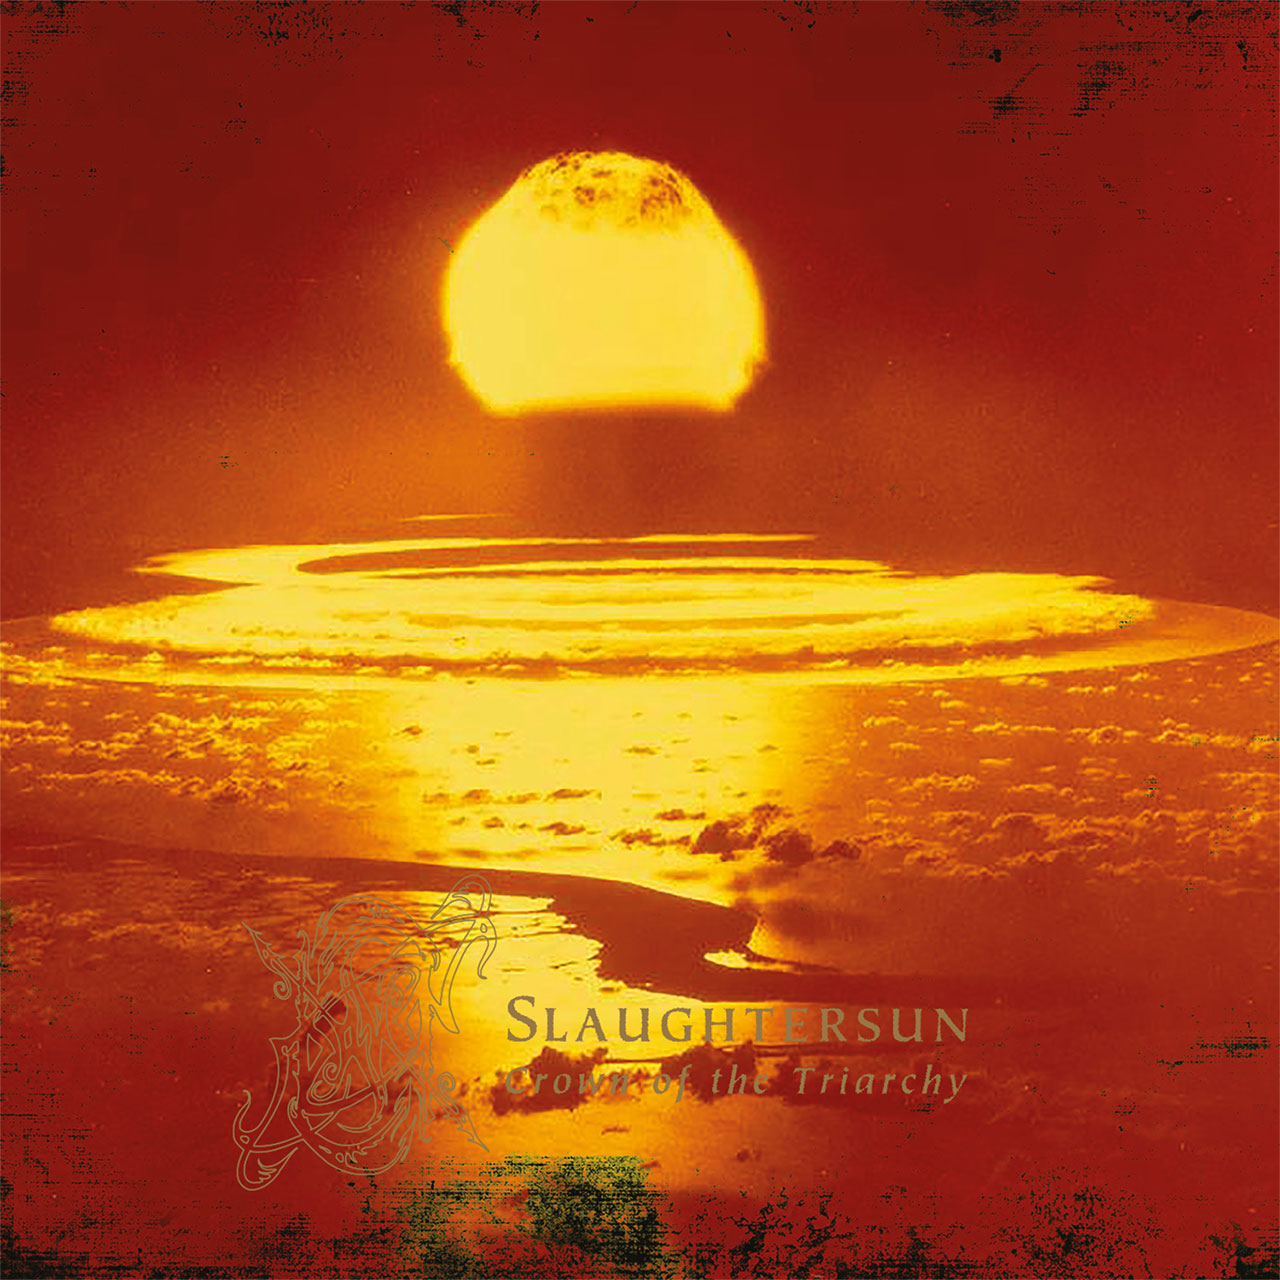 Dawn - Slaughtersun (Crown of the Triarchy) (2014 Reissue) (CD)